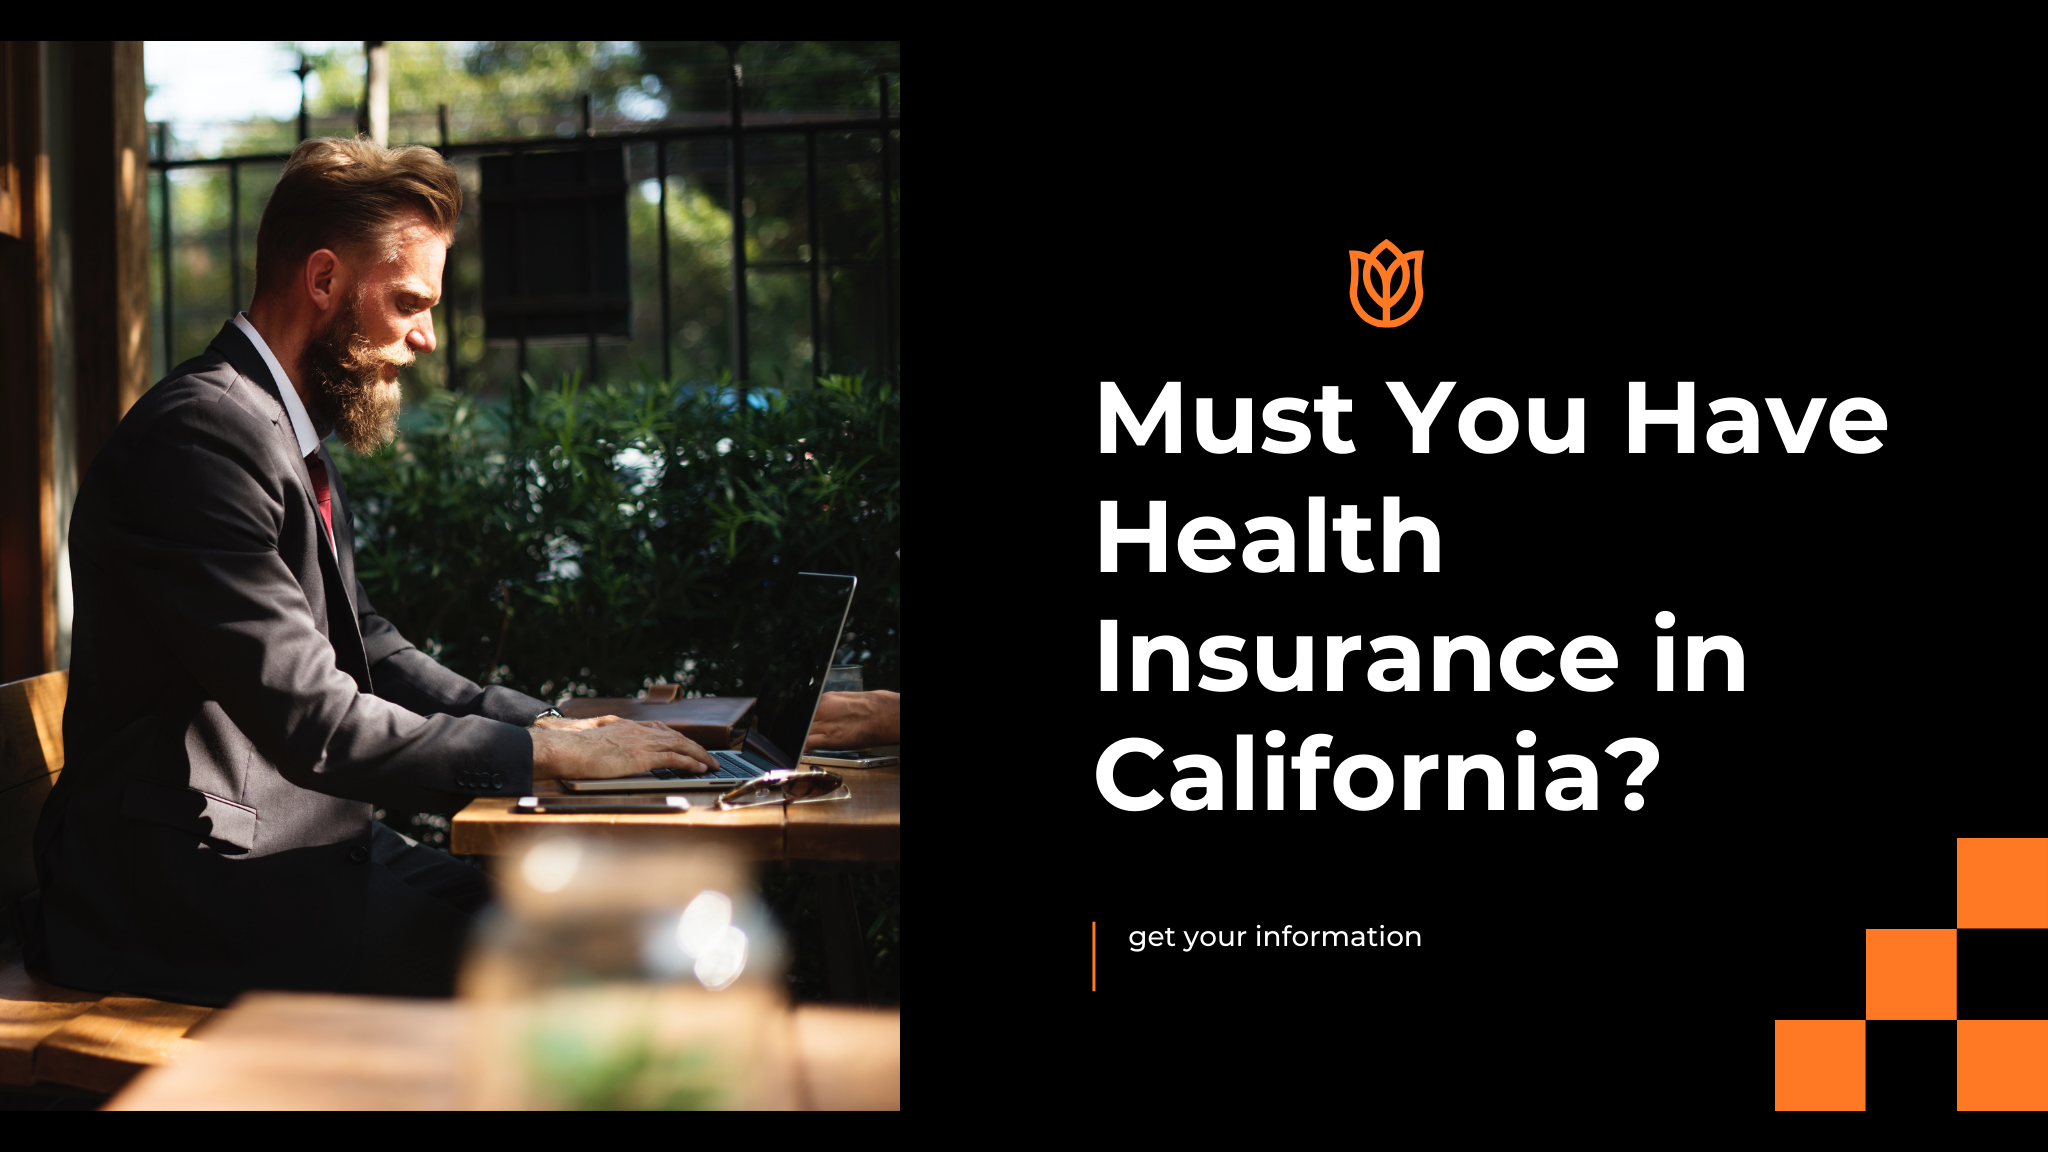 Must You Have Health Insurance in California?